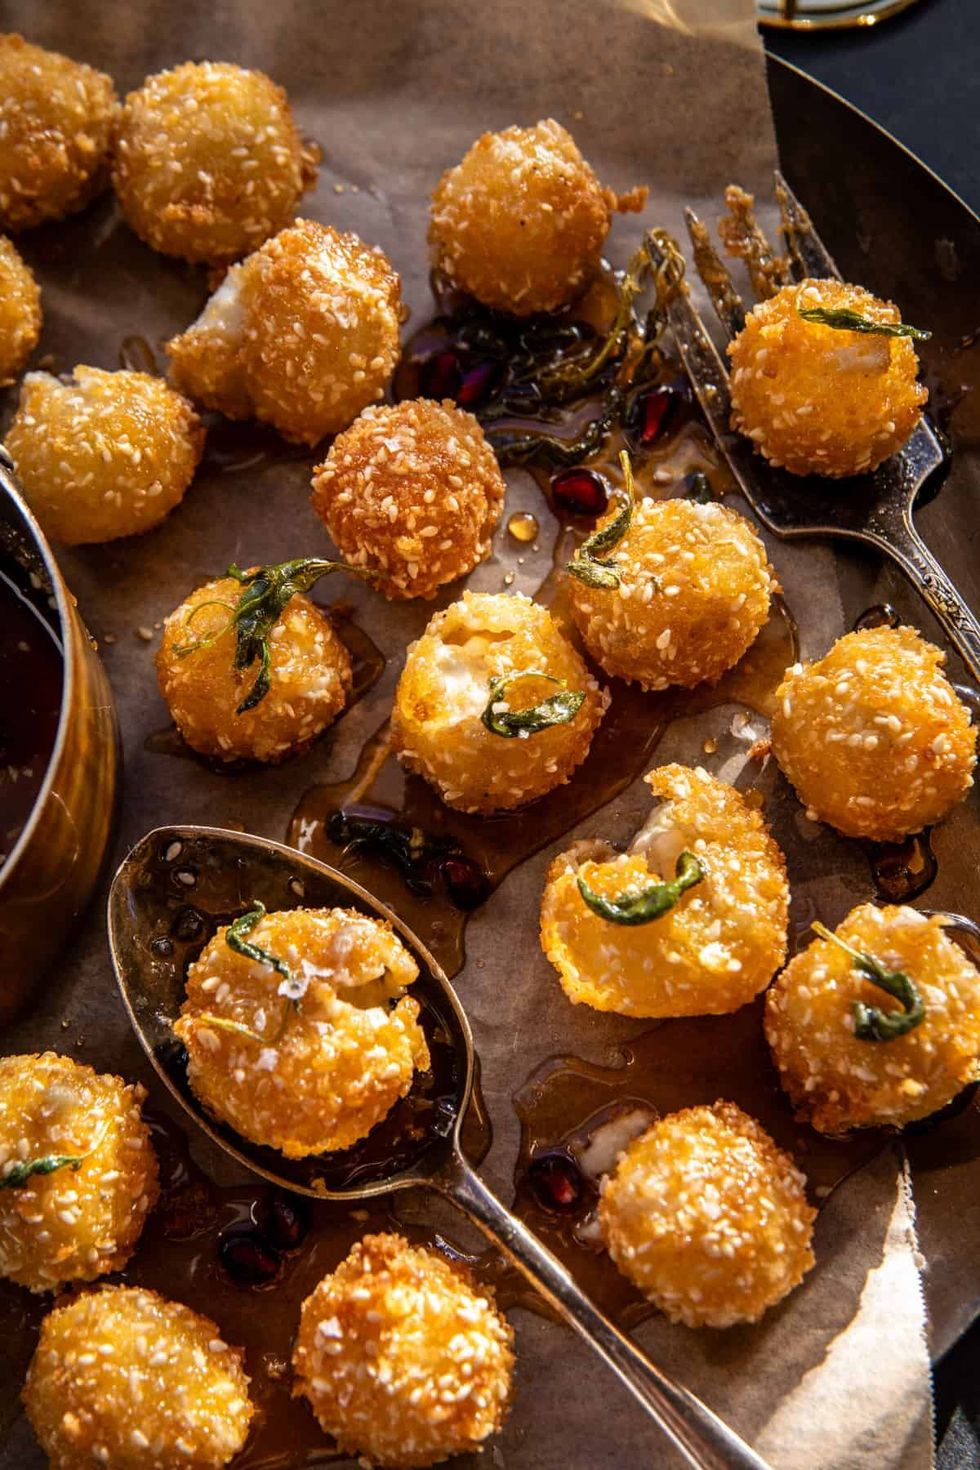 Fried Goat Cheese Balls with Spicy Sage Honey